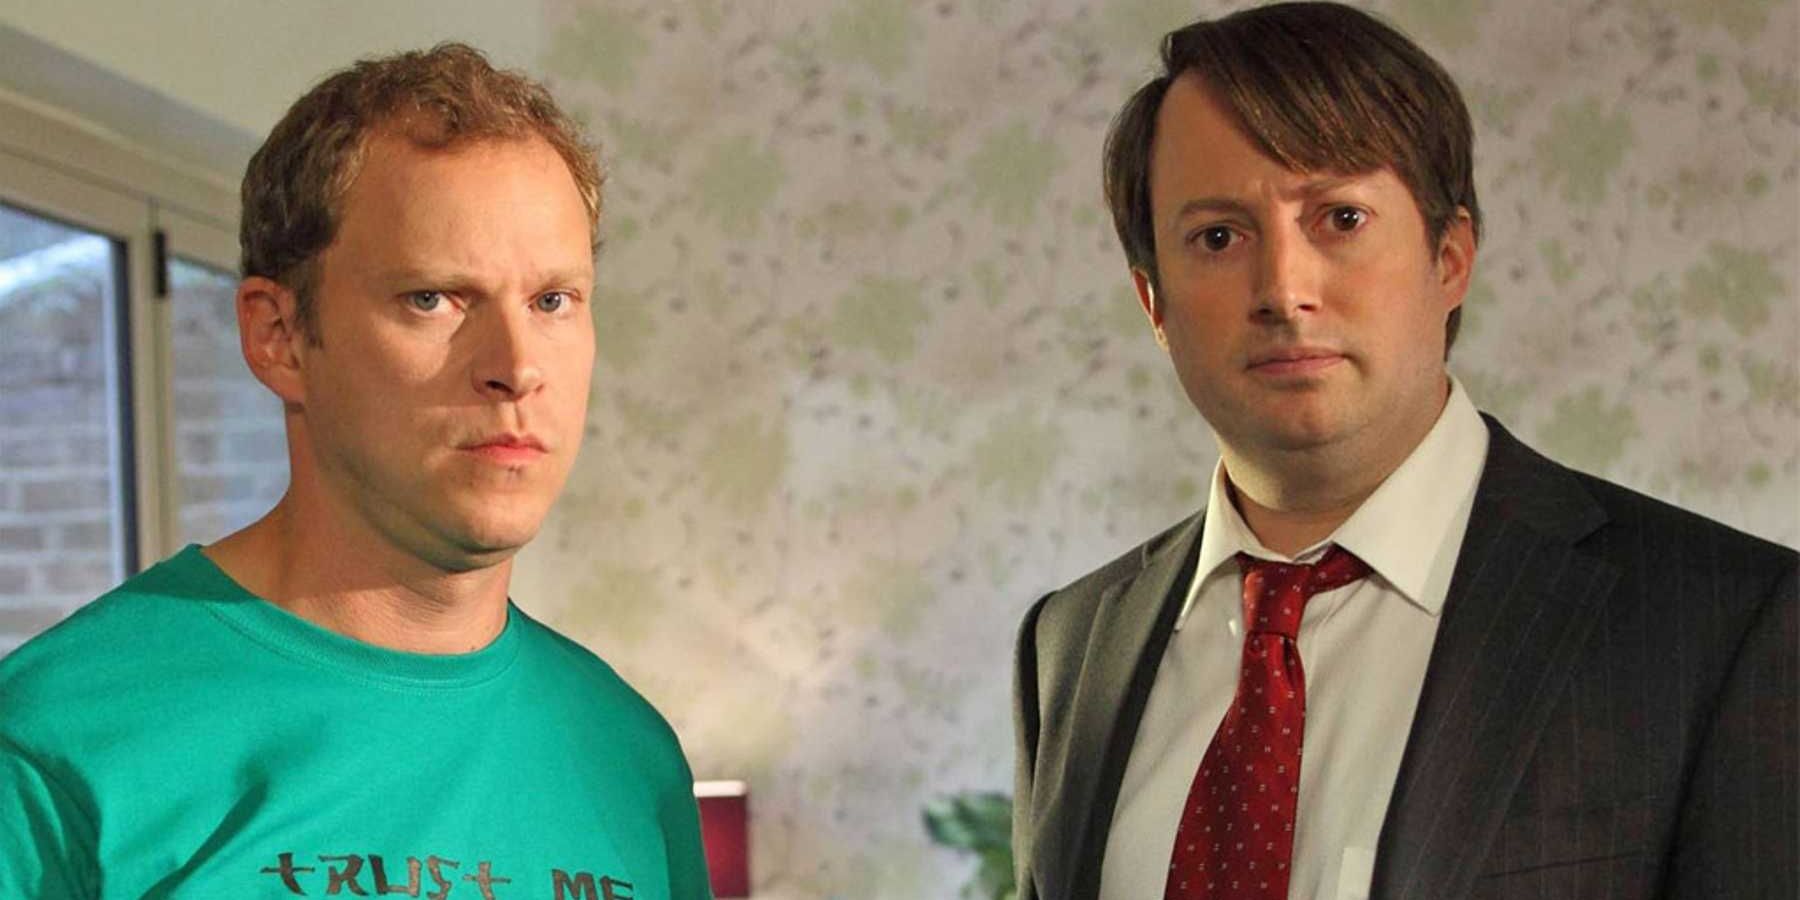 Mark and Jez in Peep Show both scowling at the camera.